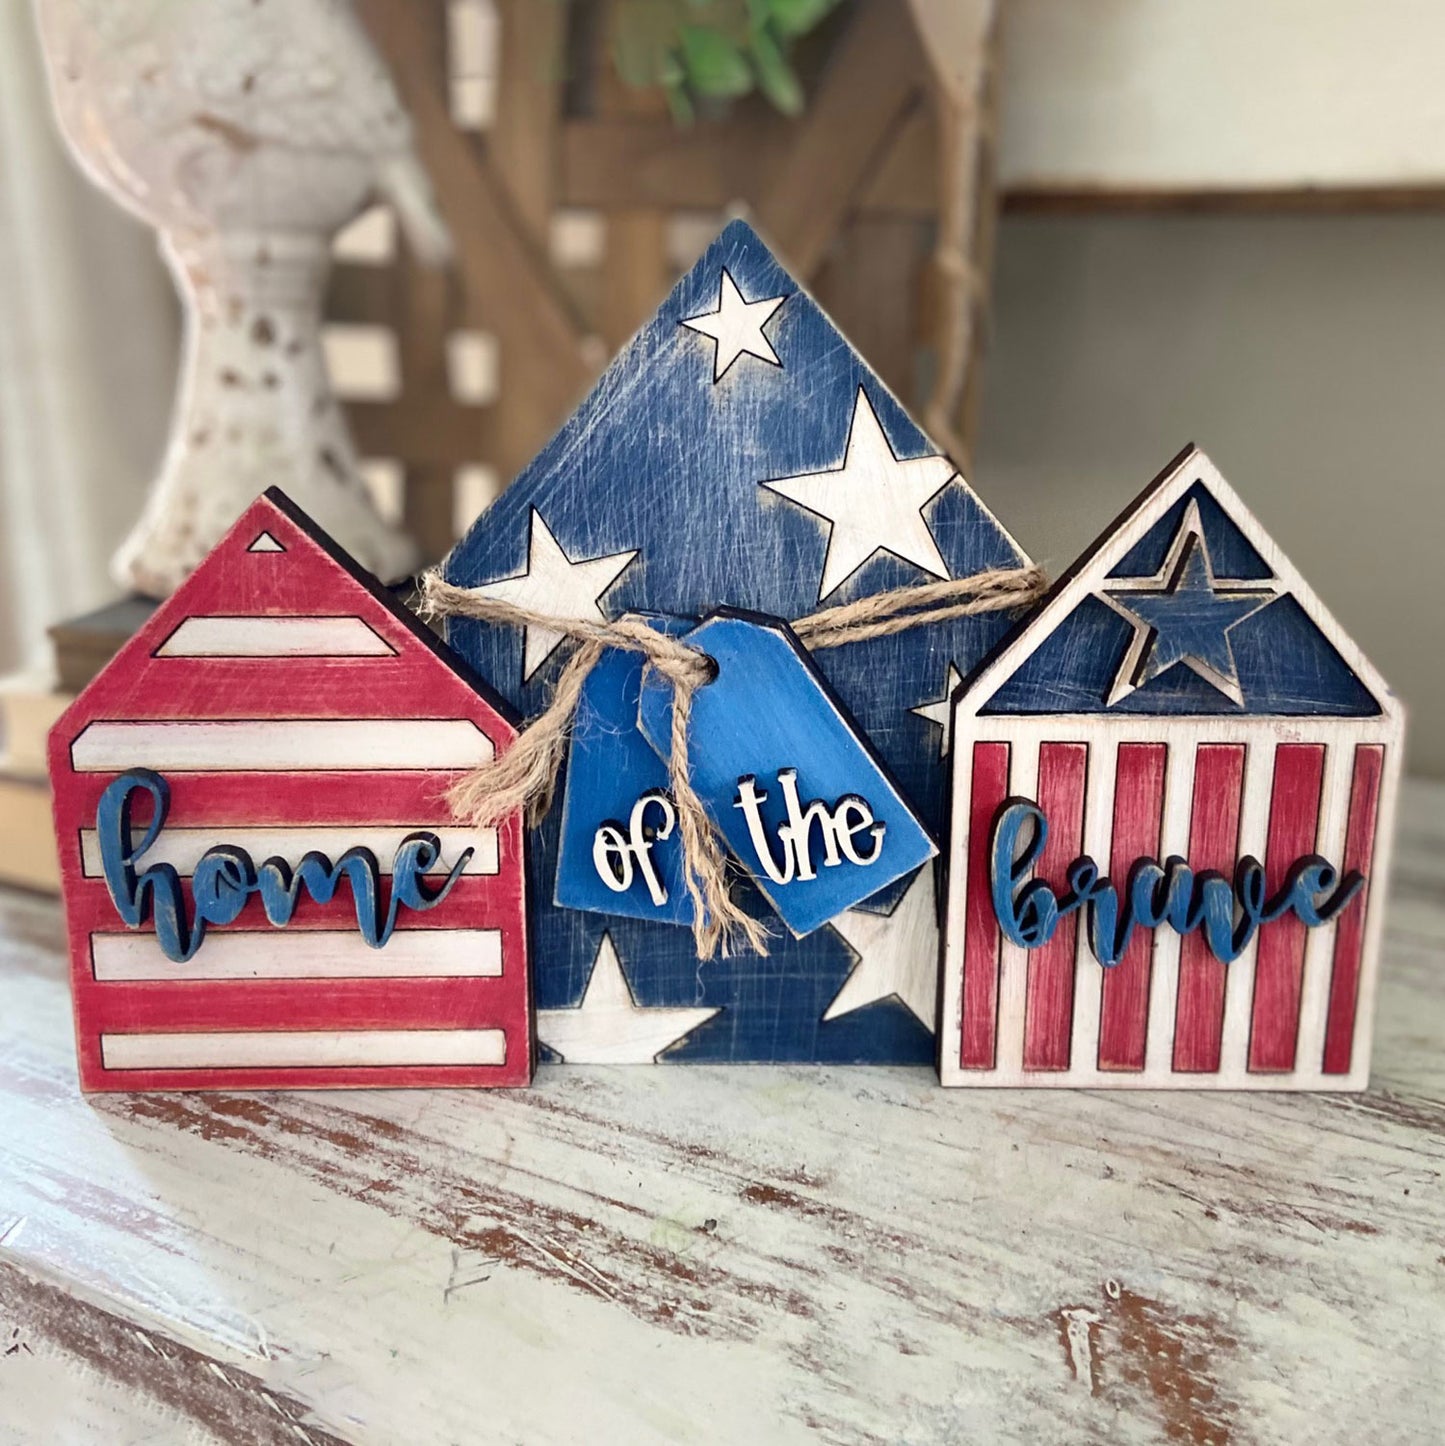 Red, White & Blue July Themed Home of the Brave House Shelf Sitter (Set of 3)